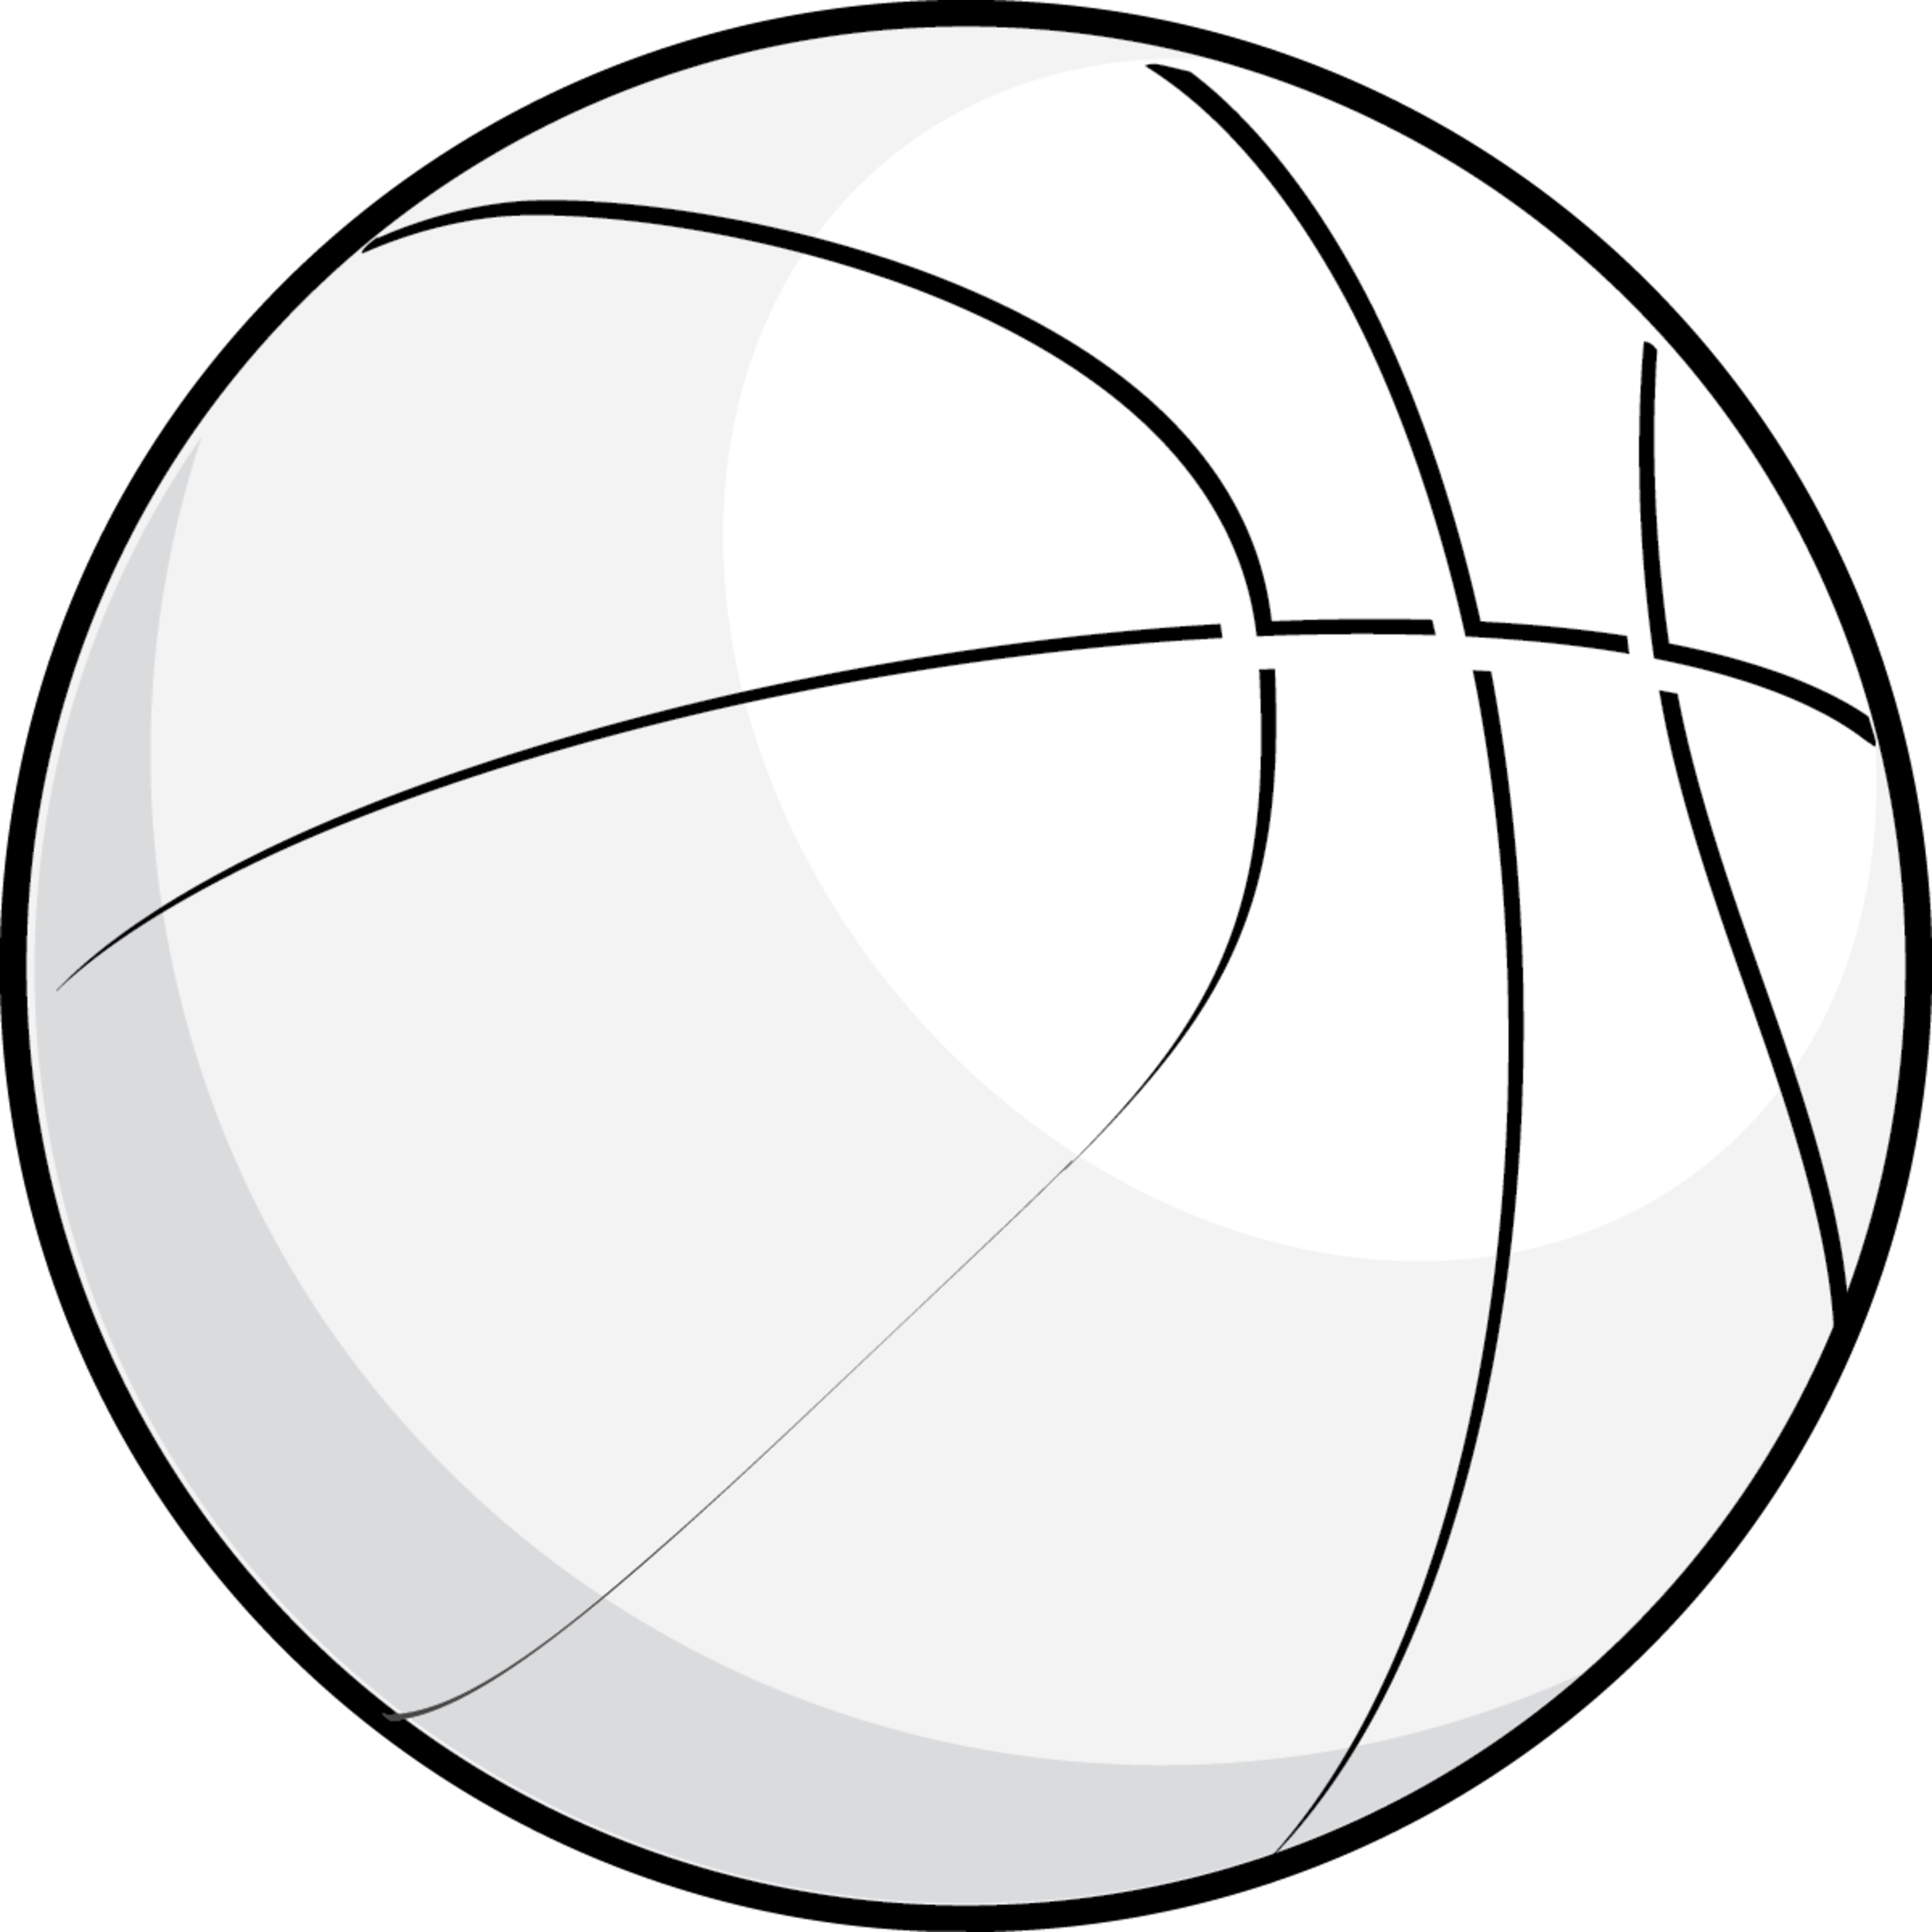 Free vector graphic basketball orange clipart rubber free image